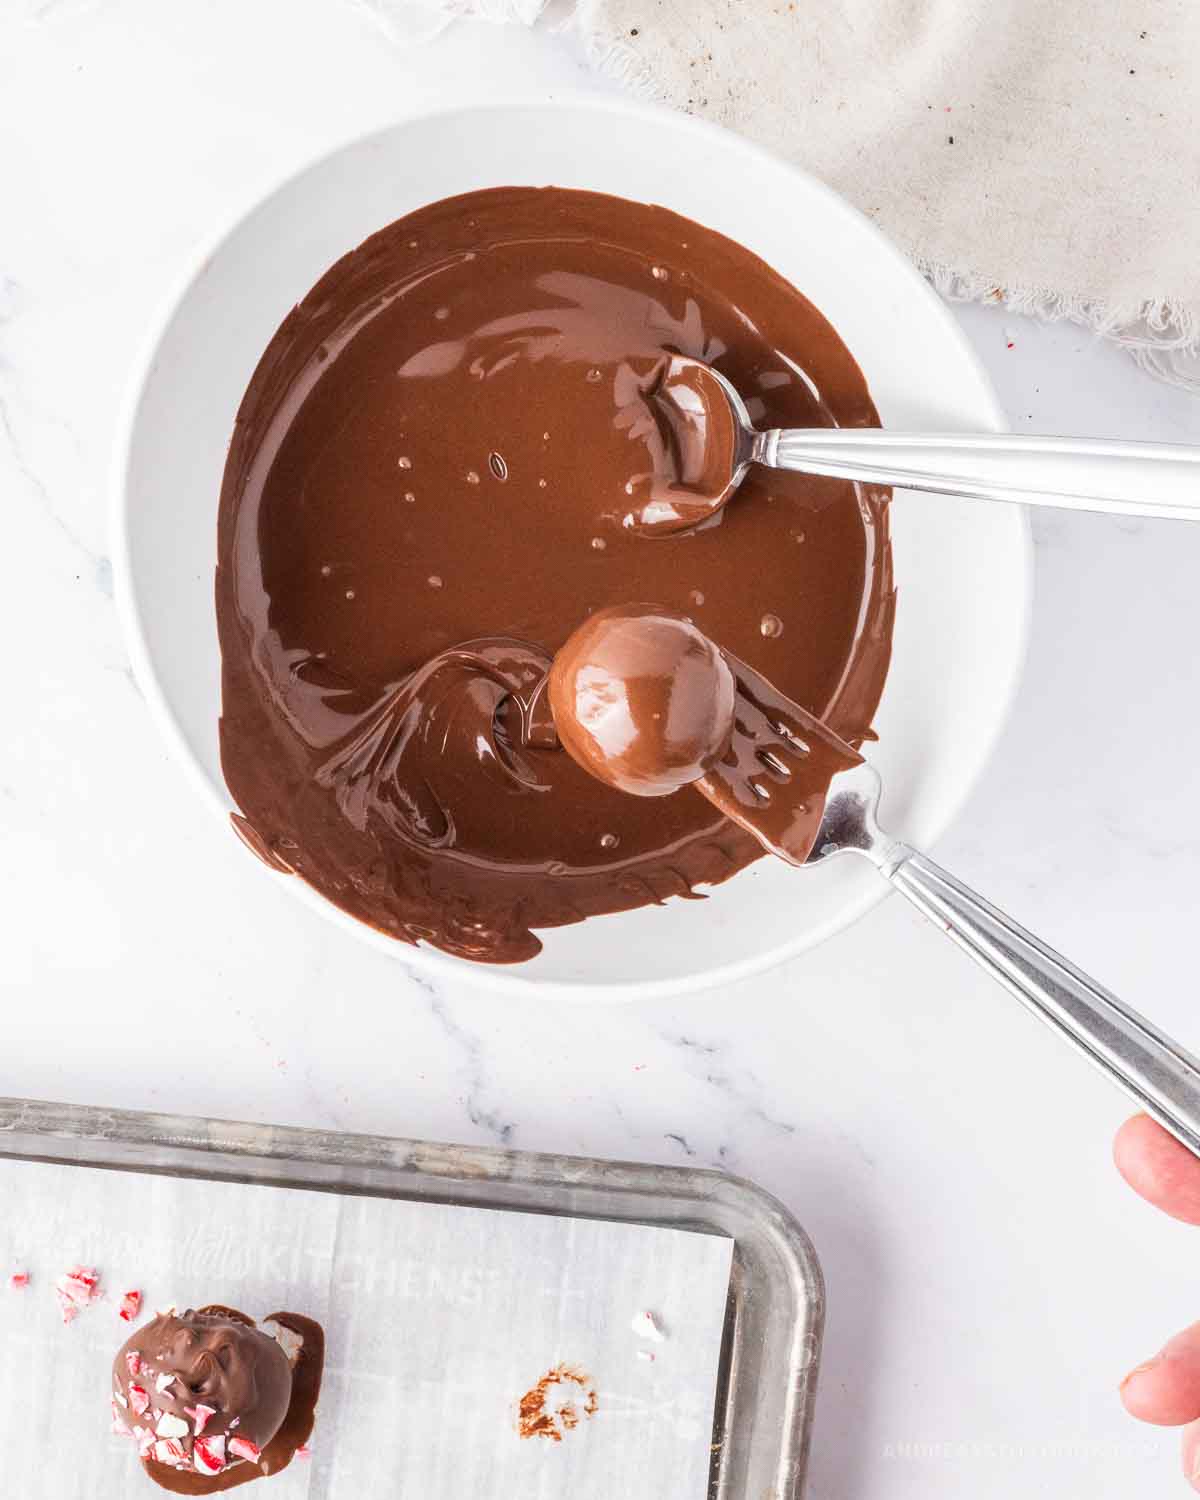 Fork dipping round truffle ball into chocolate coating.